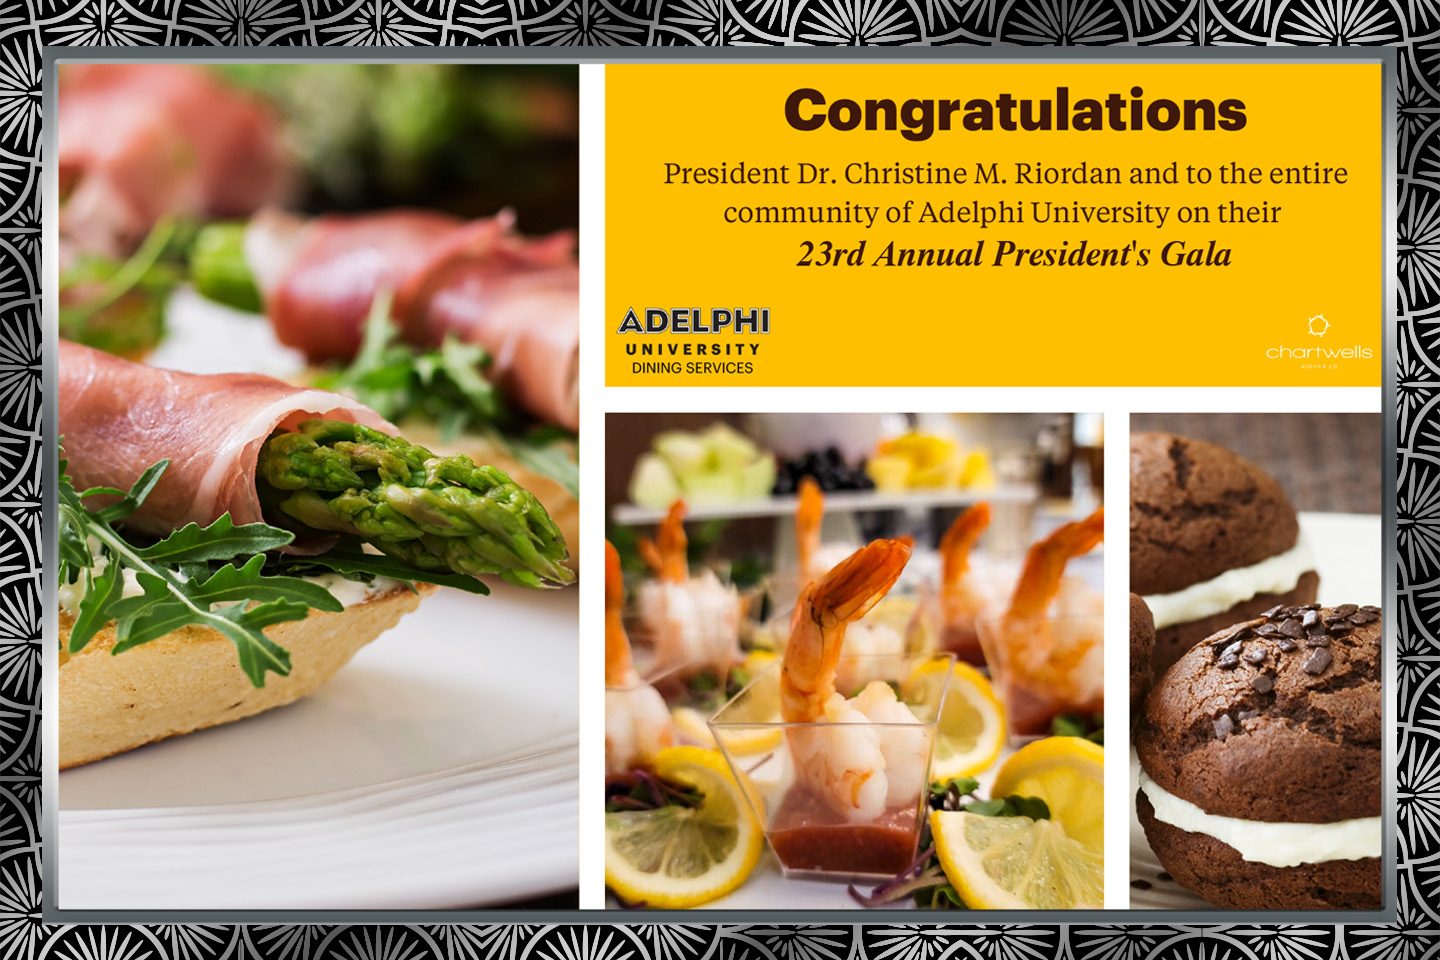 Chartwells offers President Dr. Christine M. Riordan and the entire community of Adelphi University congratulations on the 23rd annual President's Gala